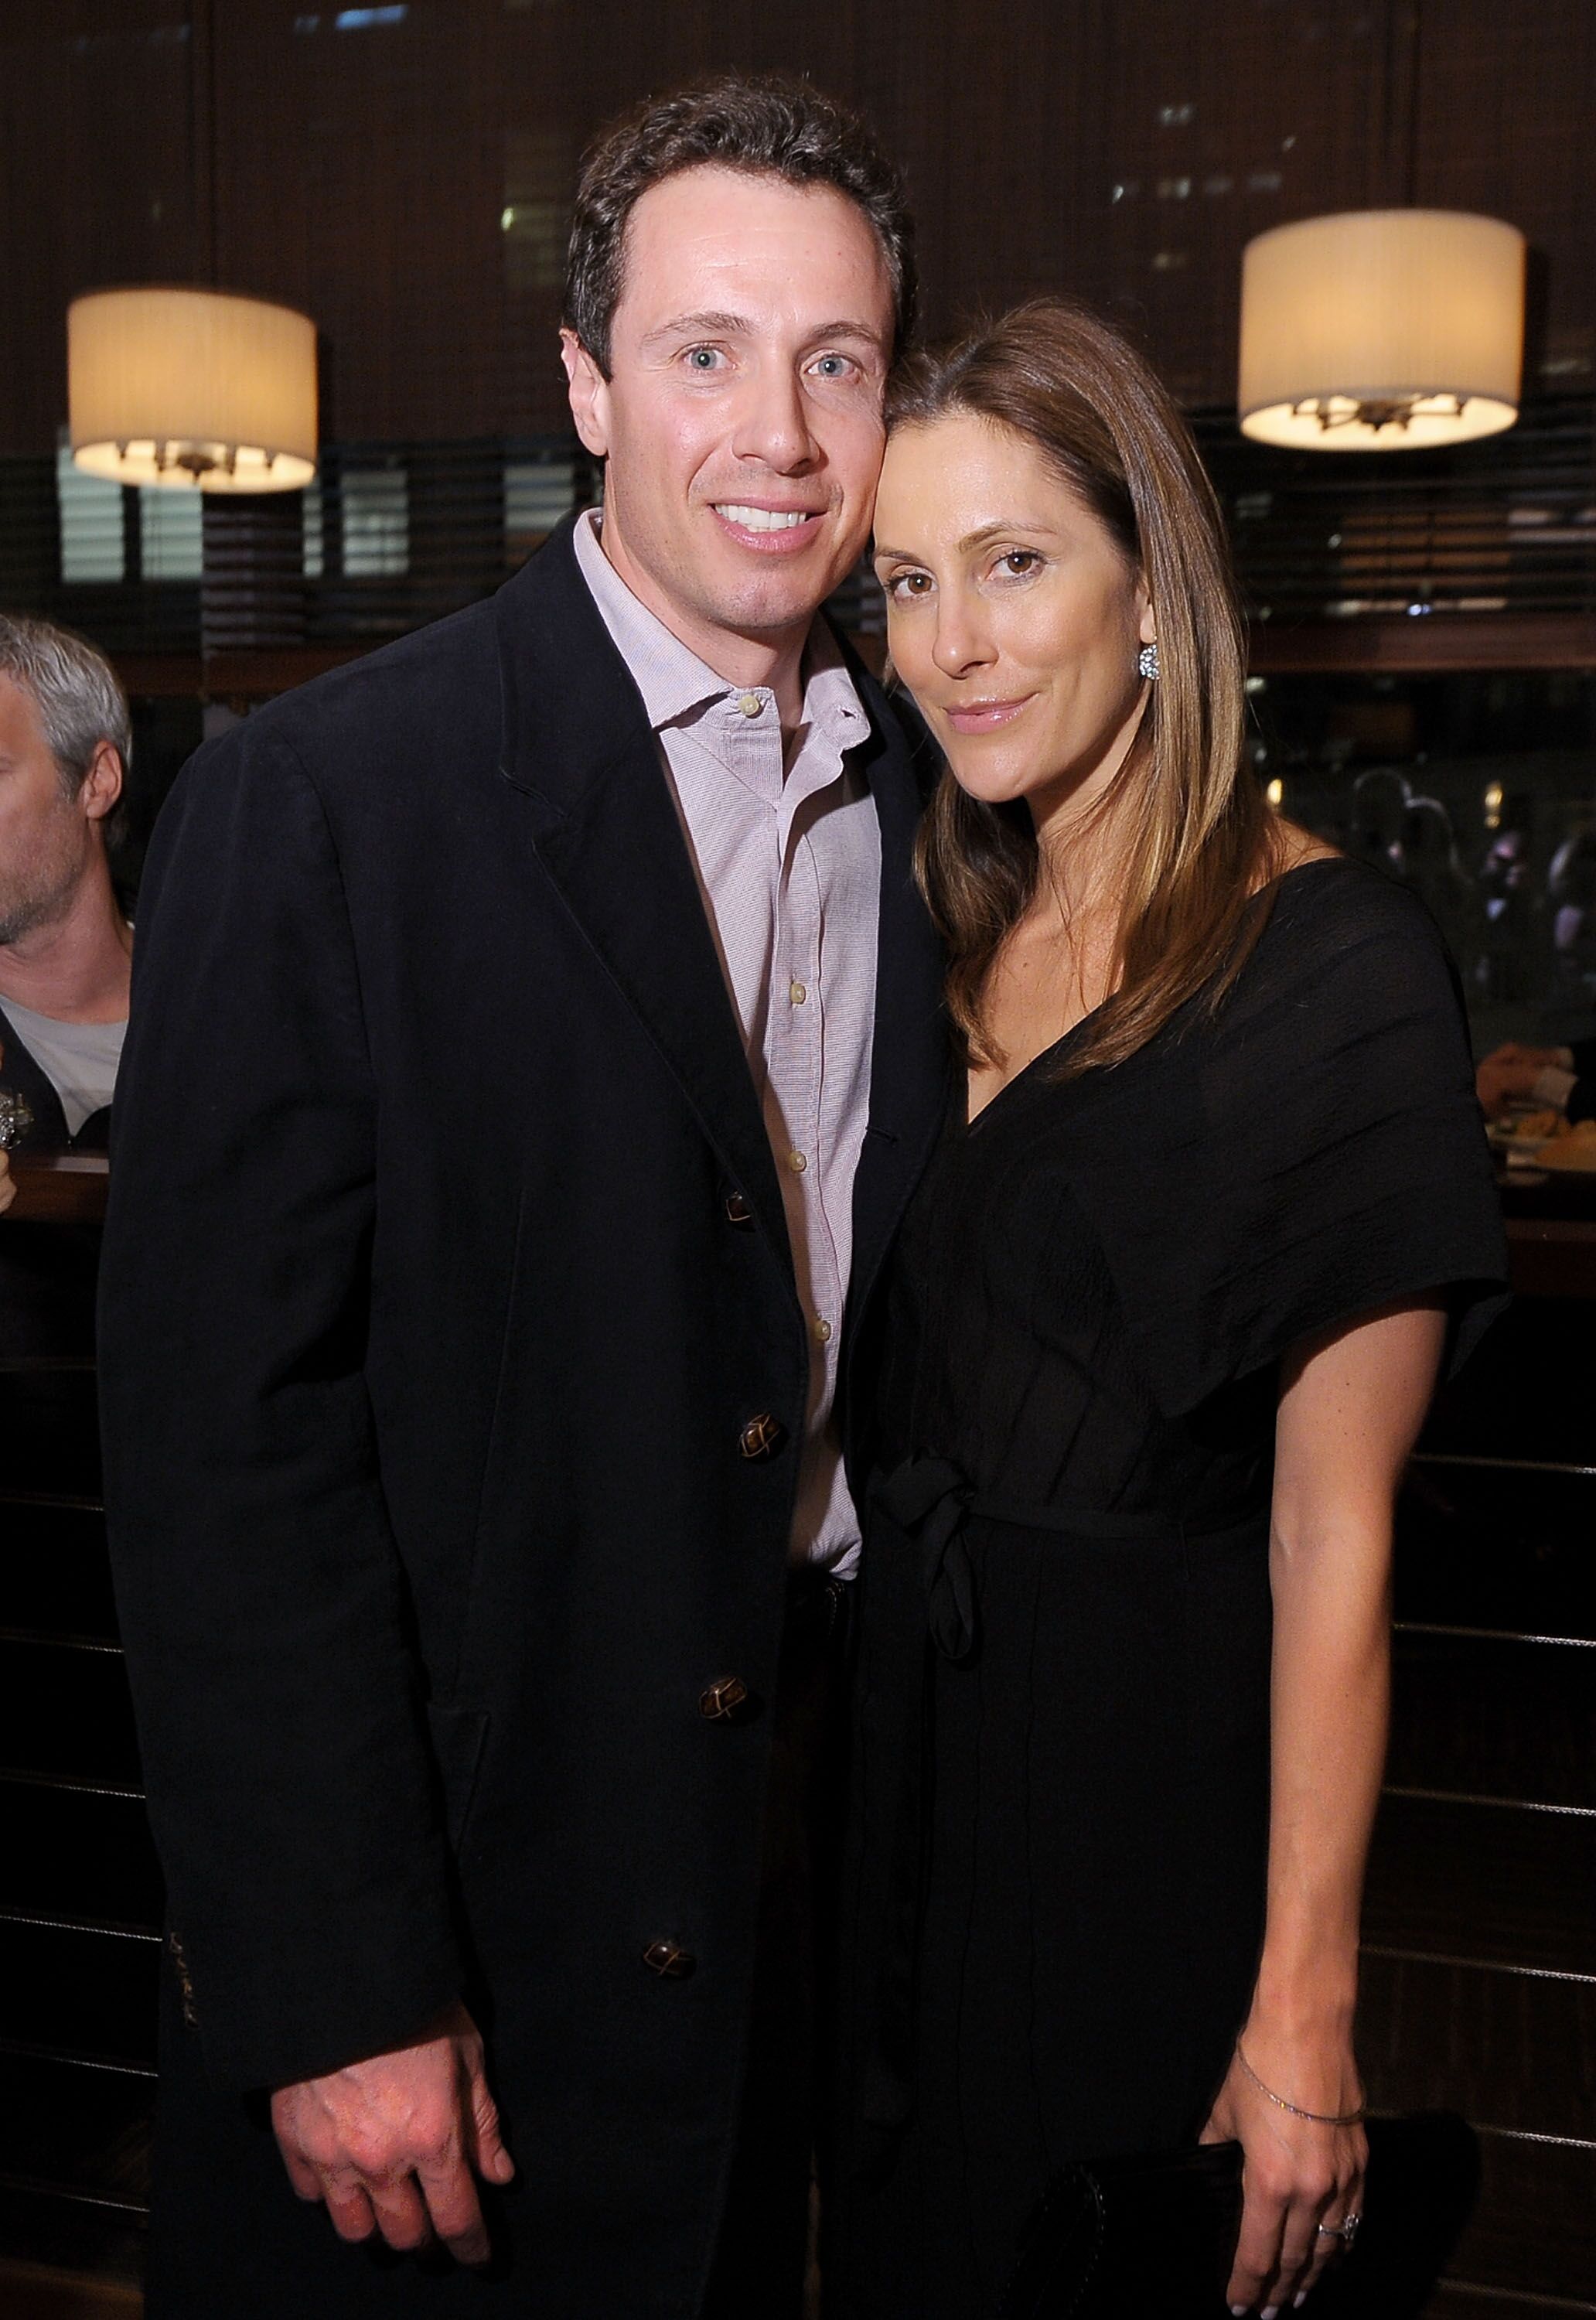 Anchorman Chris Cuomo and wife, Gotham magazine editor-in-chief Cristina Greeven Cuomo attend the HBO Documentary Screening Of "His Way" at Time Warner Center on March 30, 2011 | Photo: Getty Images